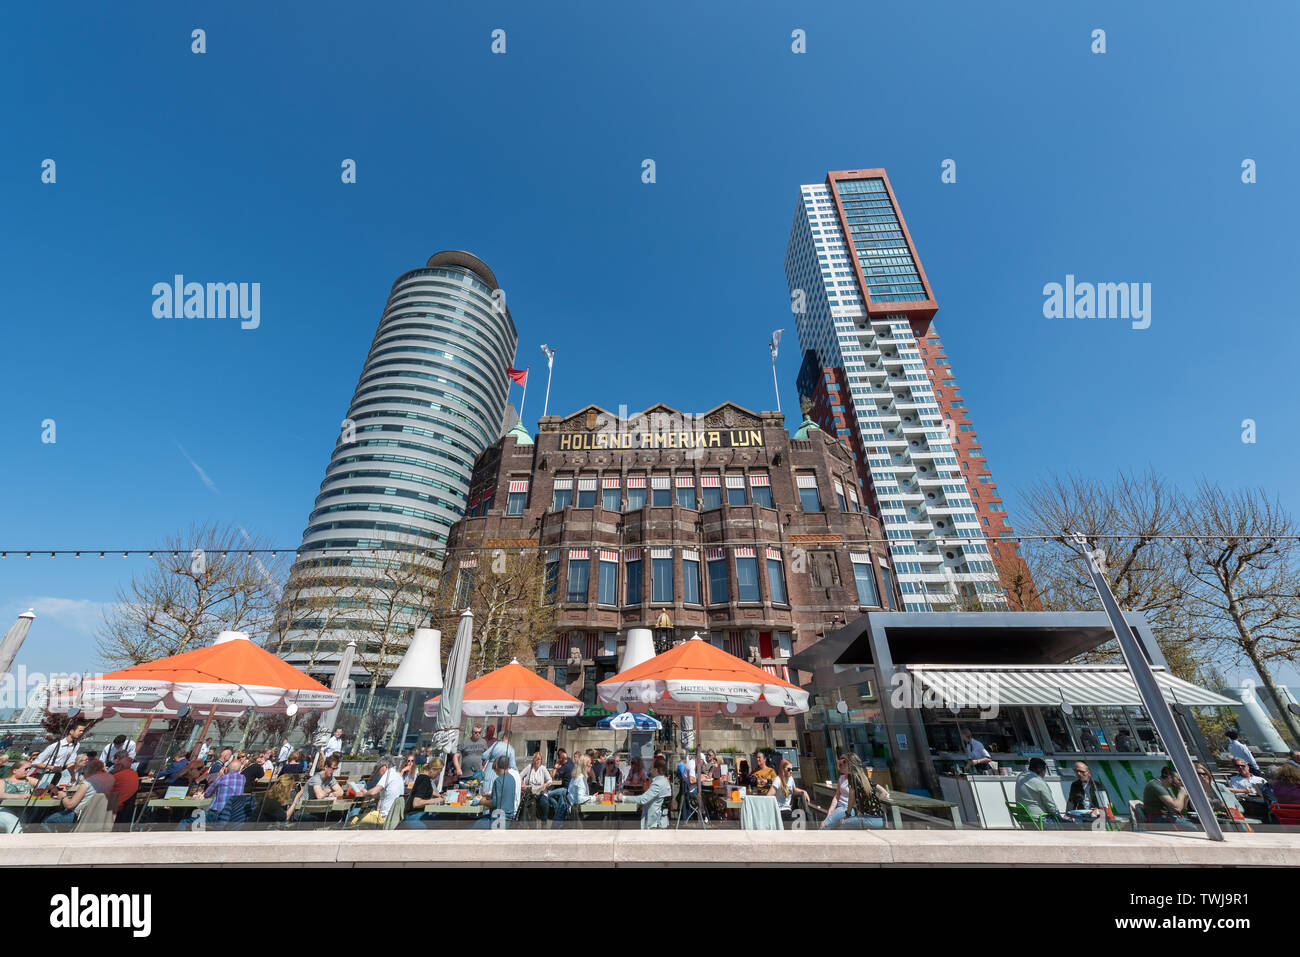 Rotterdam, Netherlands - April 18, 2019 : People having a dring and eating on the terrace of Hotel New York on a sunny day Stock Photo